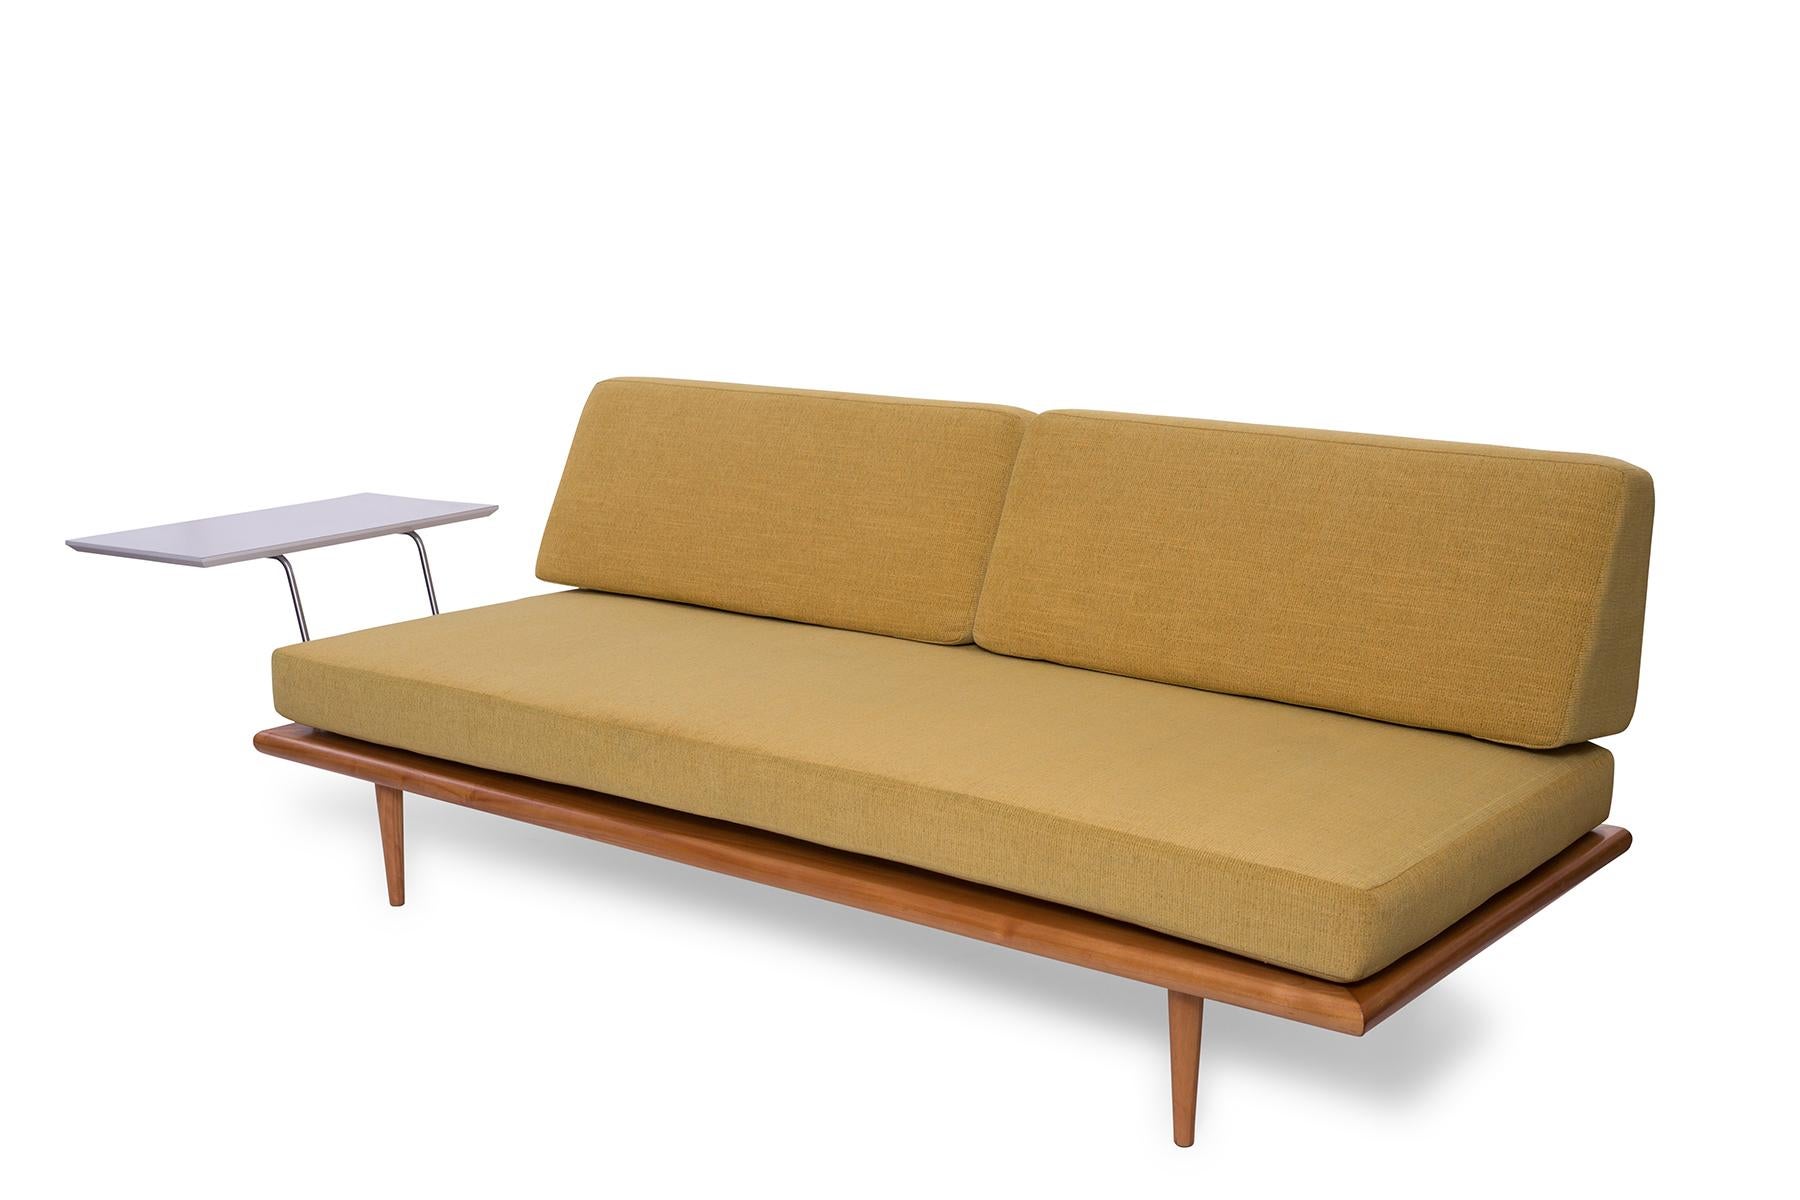 This early George Nelson for Herman Miller daybed with mustard yellow upholstery features a seldom-seen side table arm. Please note that the length of the daybed measures 93.5 inches when including the extended arm table. Sofa has been newly